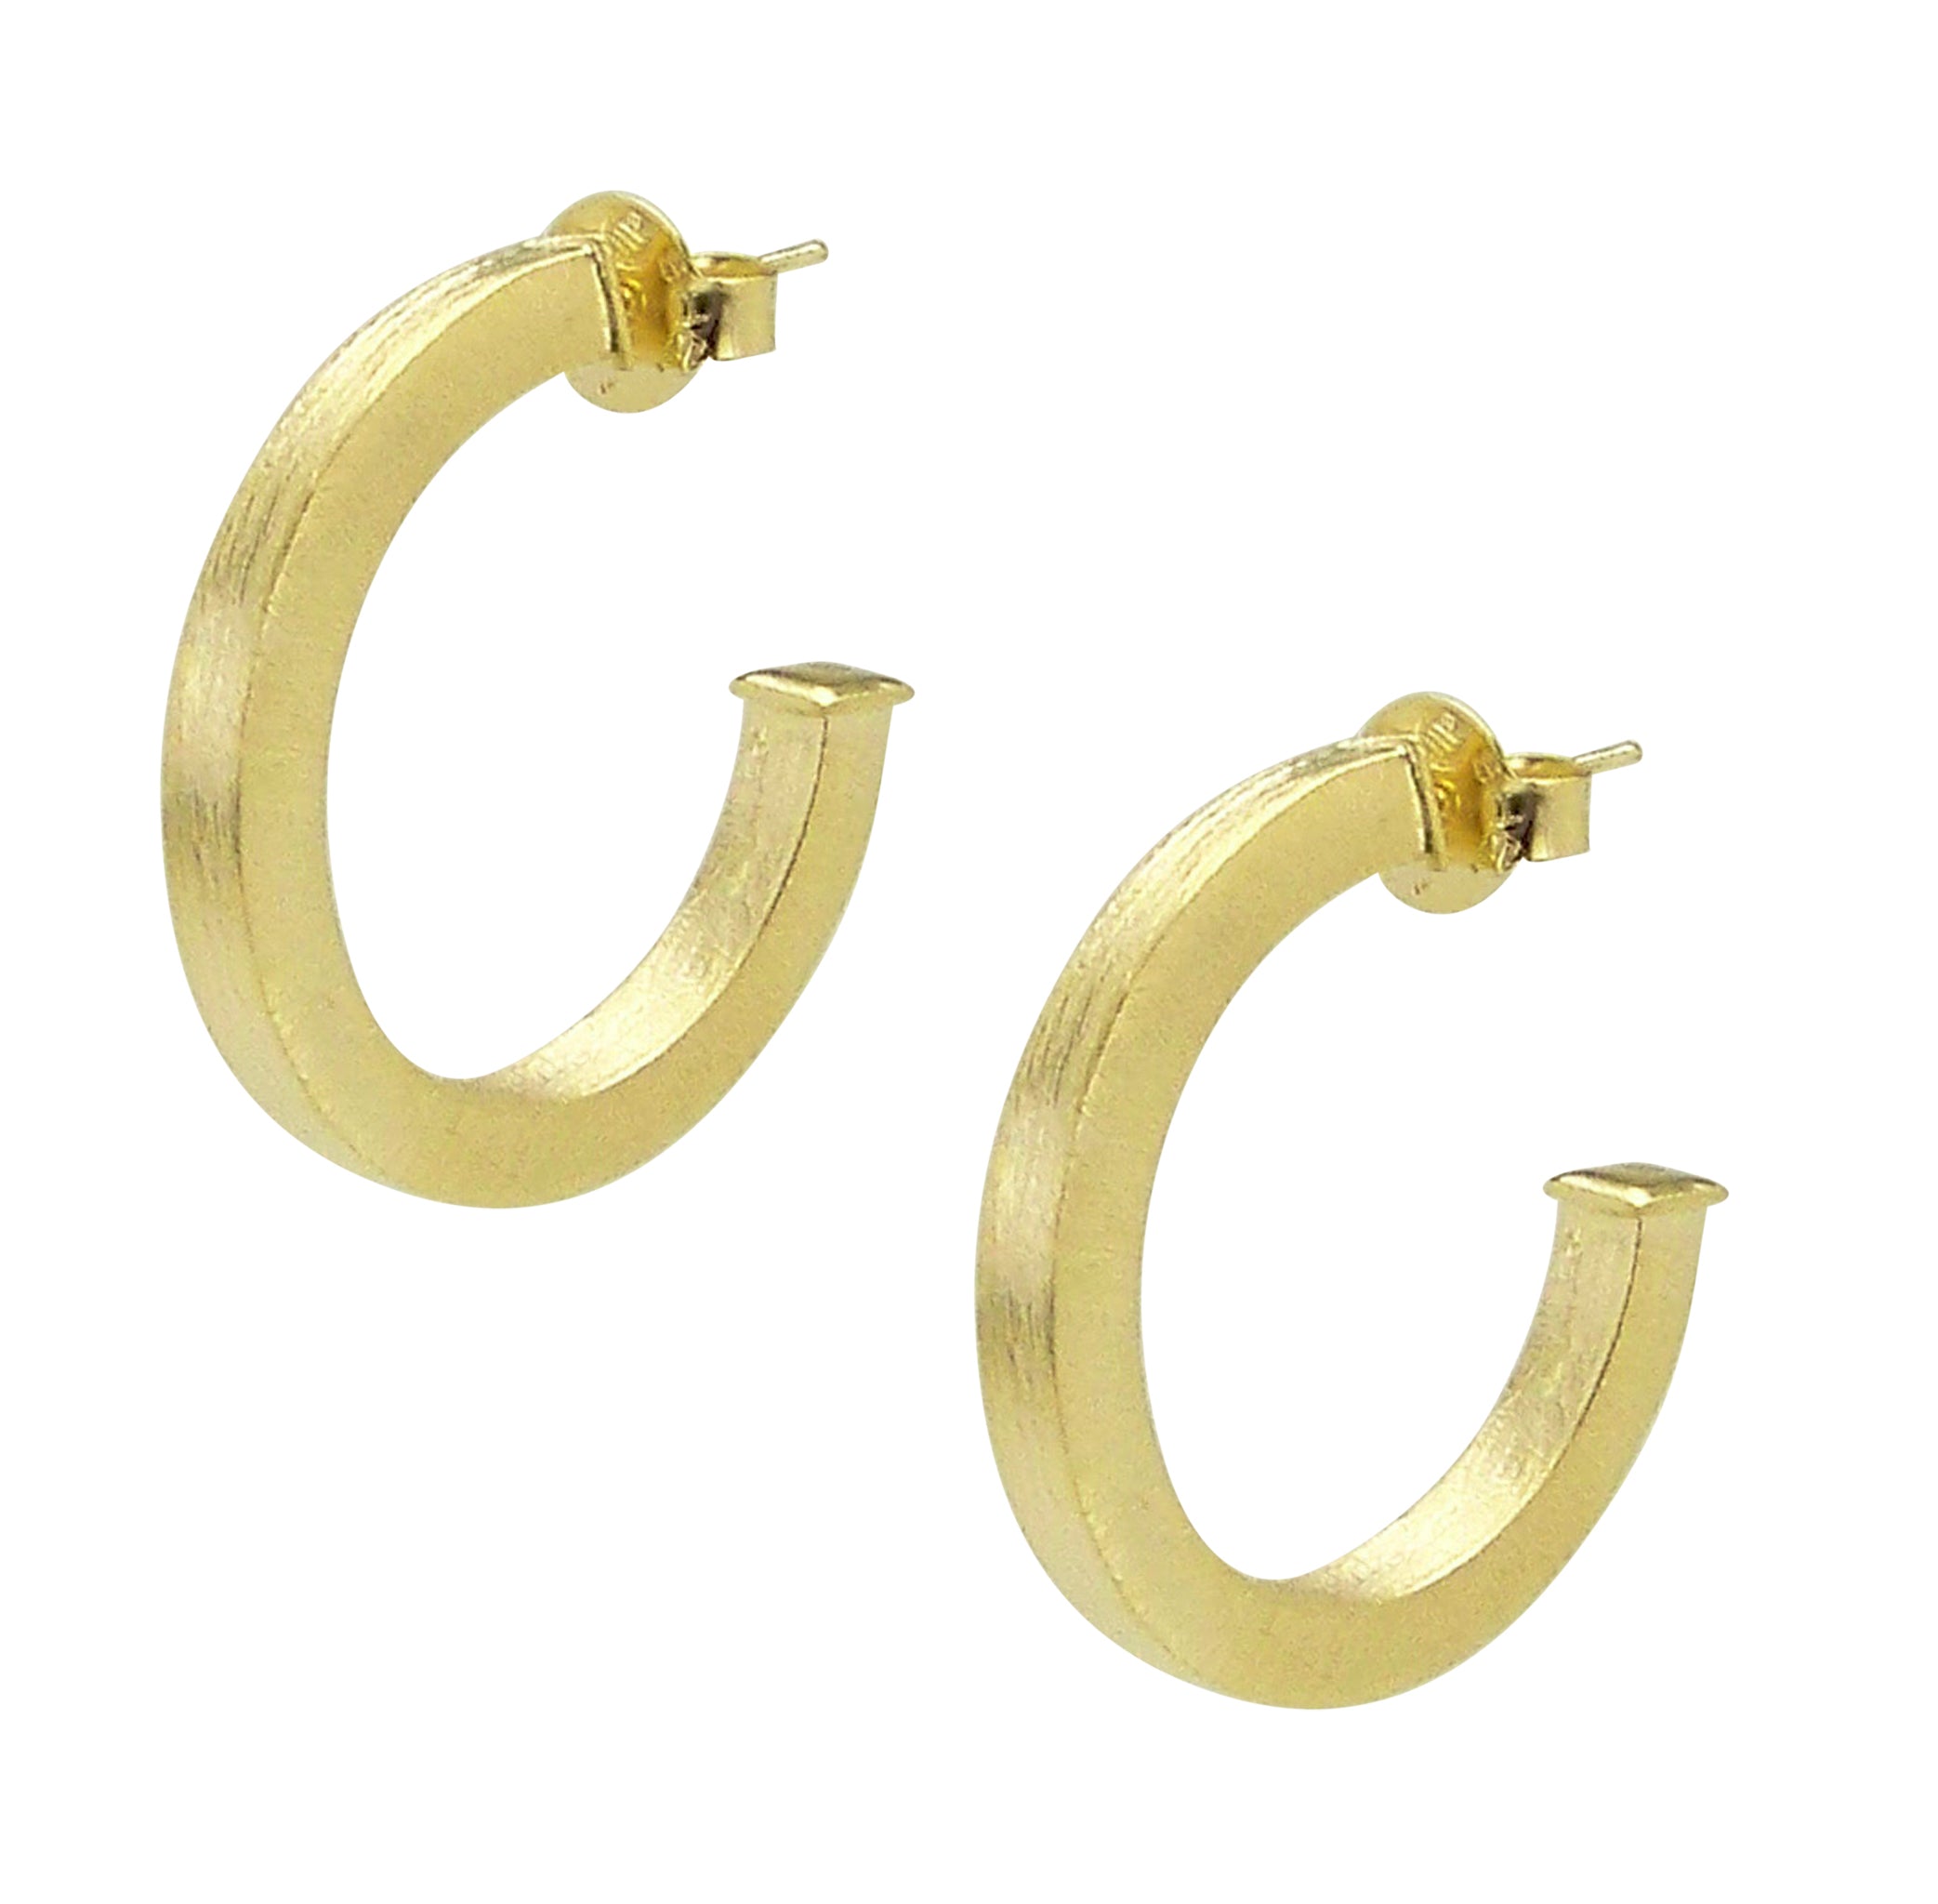 Pair of Sheila Fajl Ilana Bold Square Tube Hoop Earrings in Gold Plated